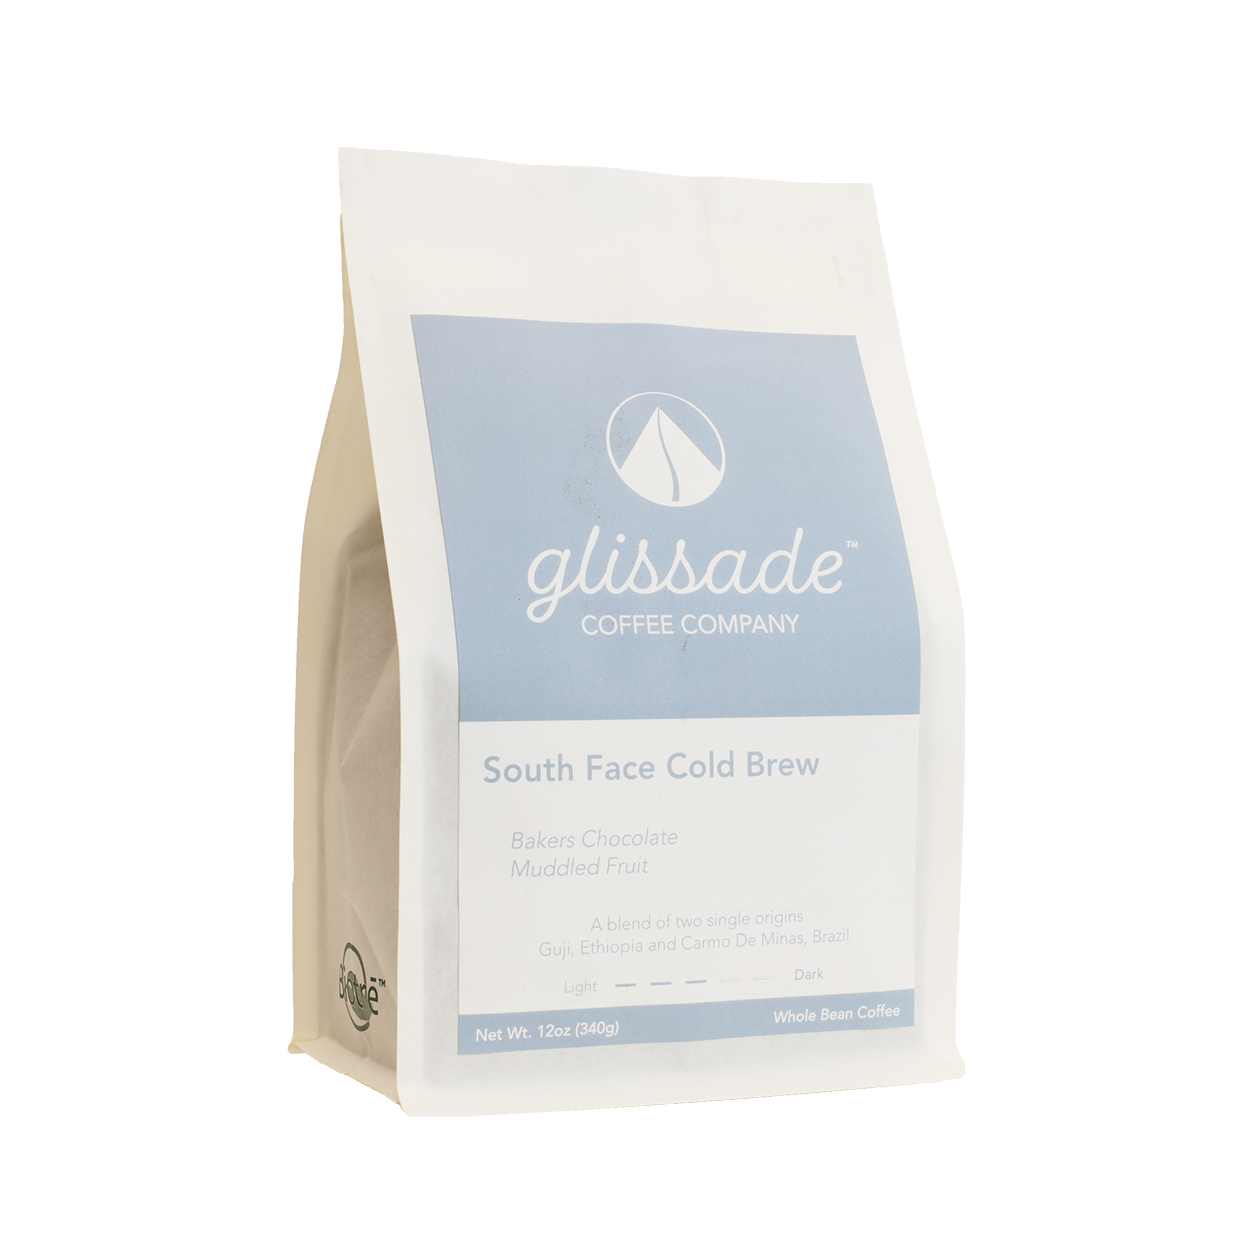 South Face Cold Brew